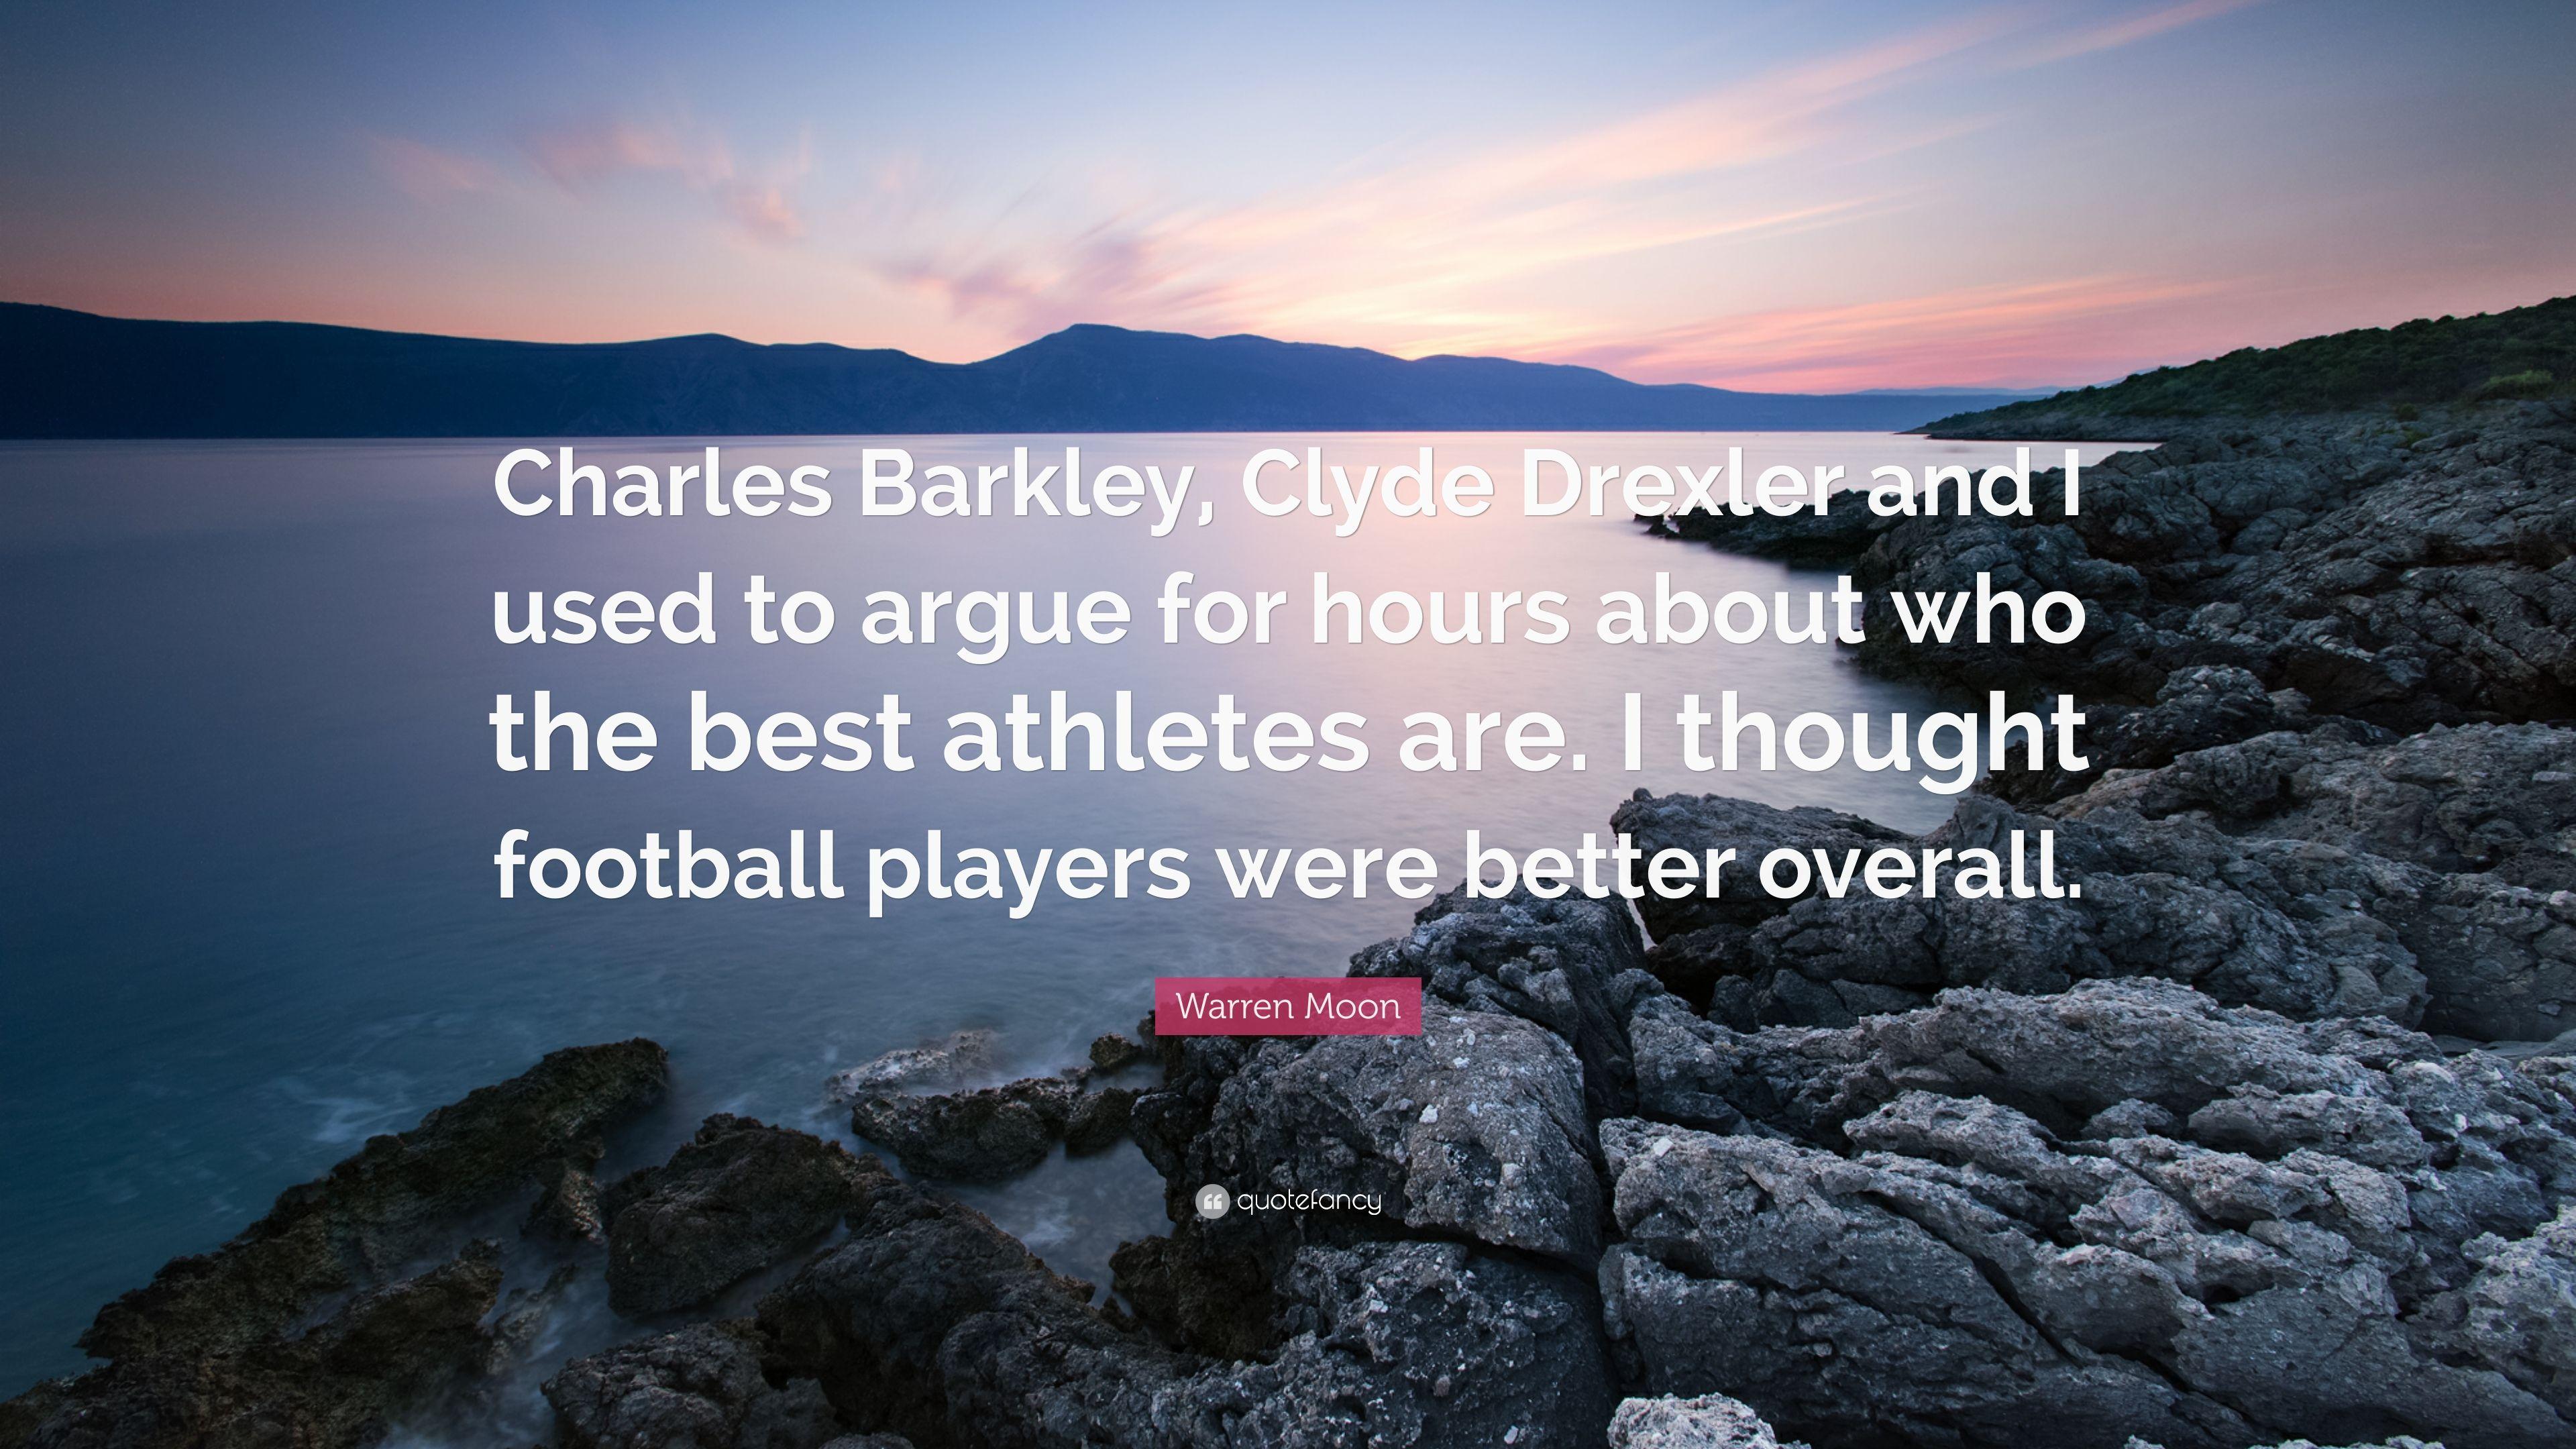 Warren Moon Quote: “Charles Barkley, Clyde Drexler and I used to